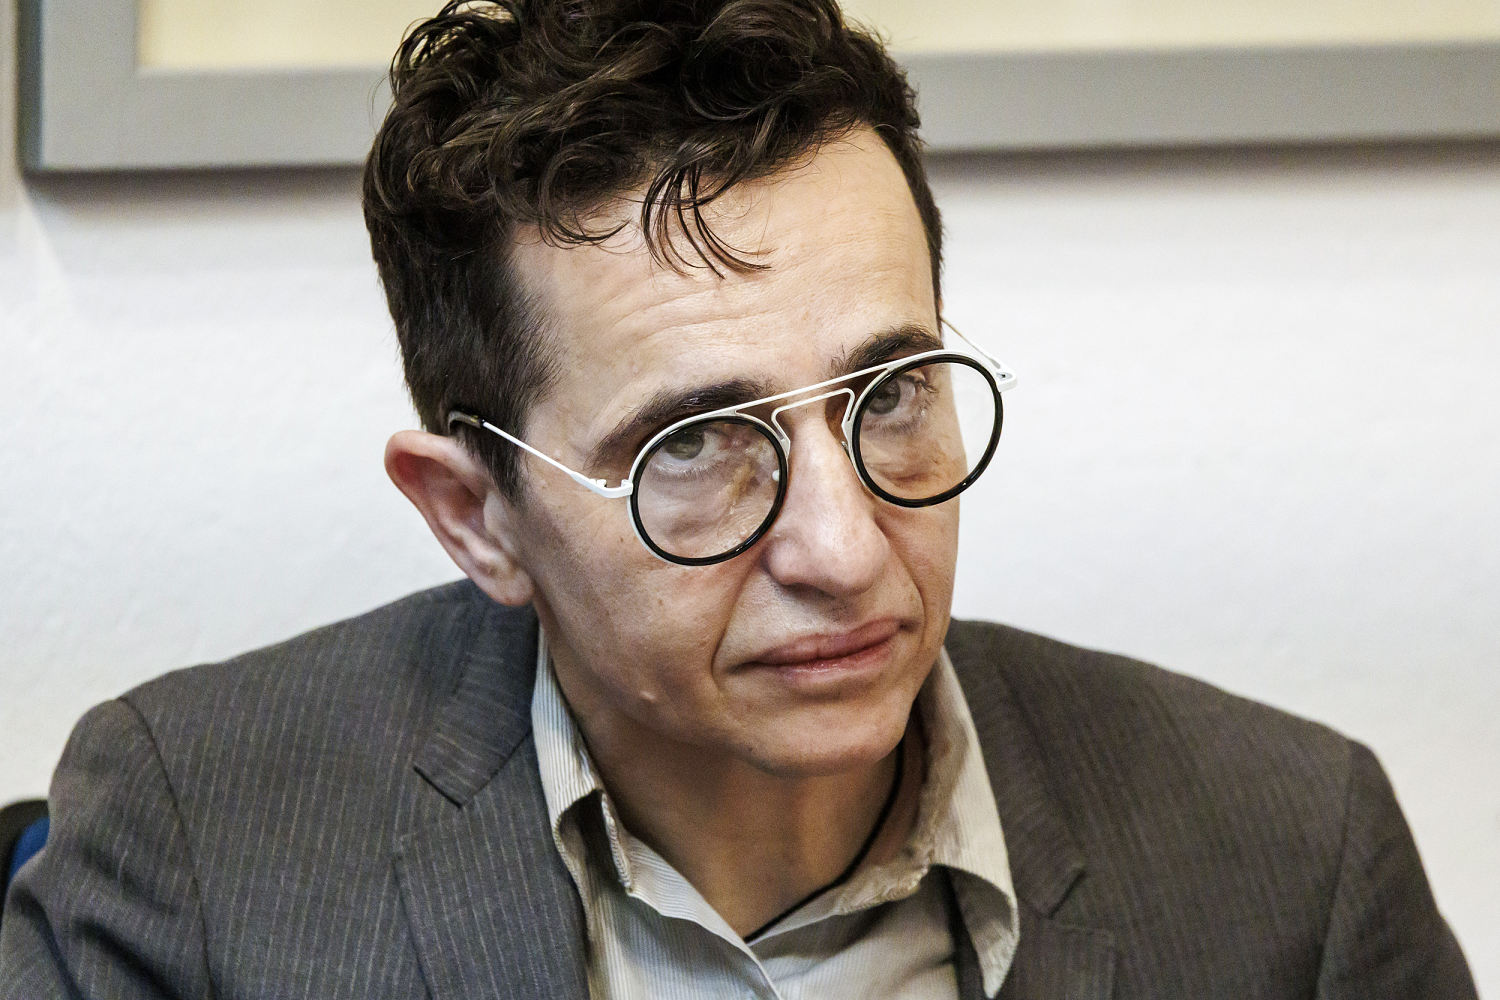 U.S. journalist Masha Gessen is convicted in absentia in Russia for criticizing the military